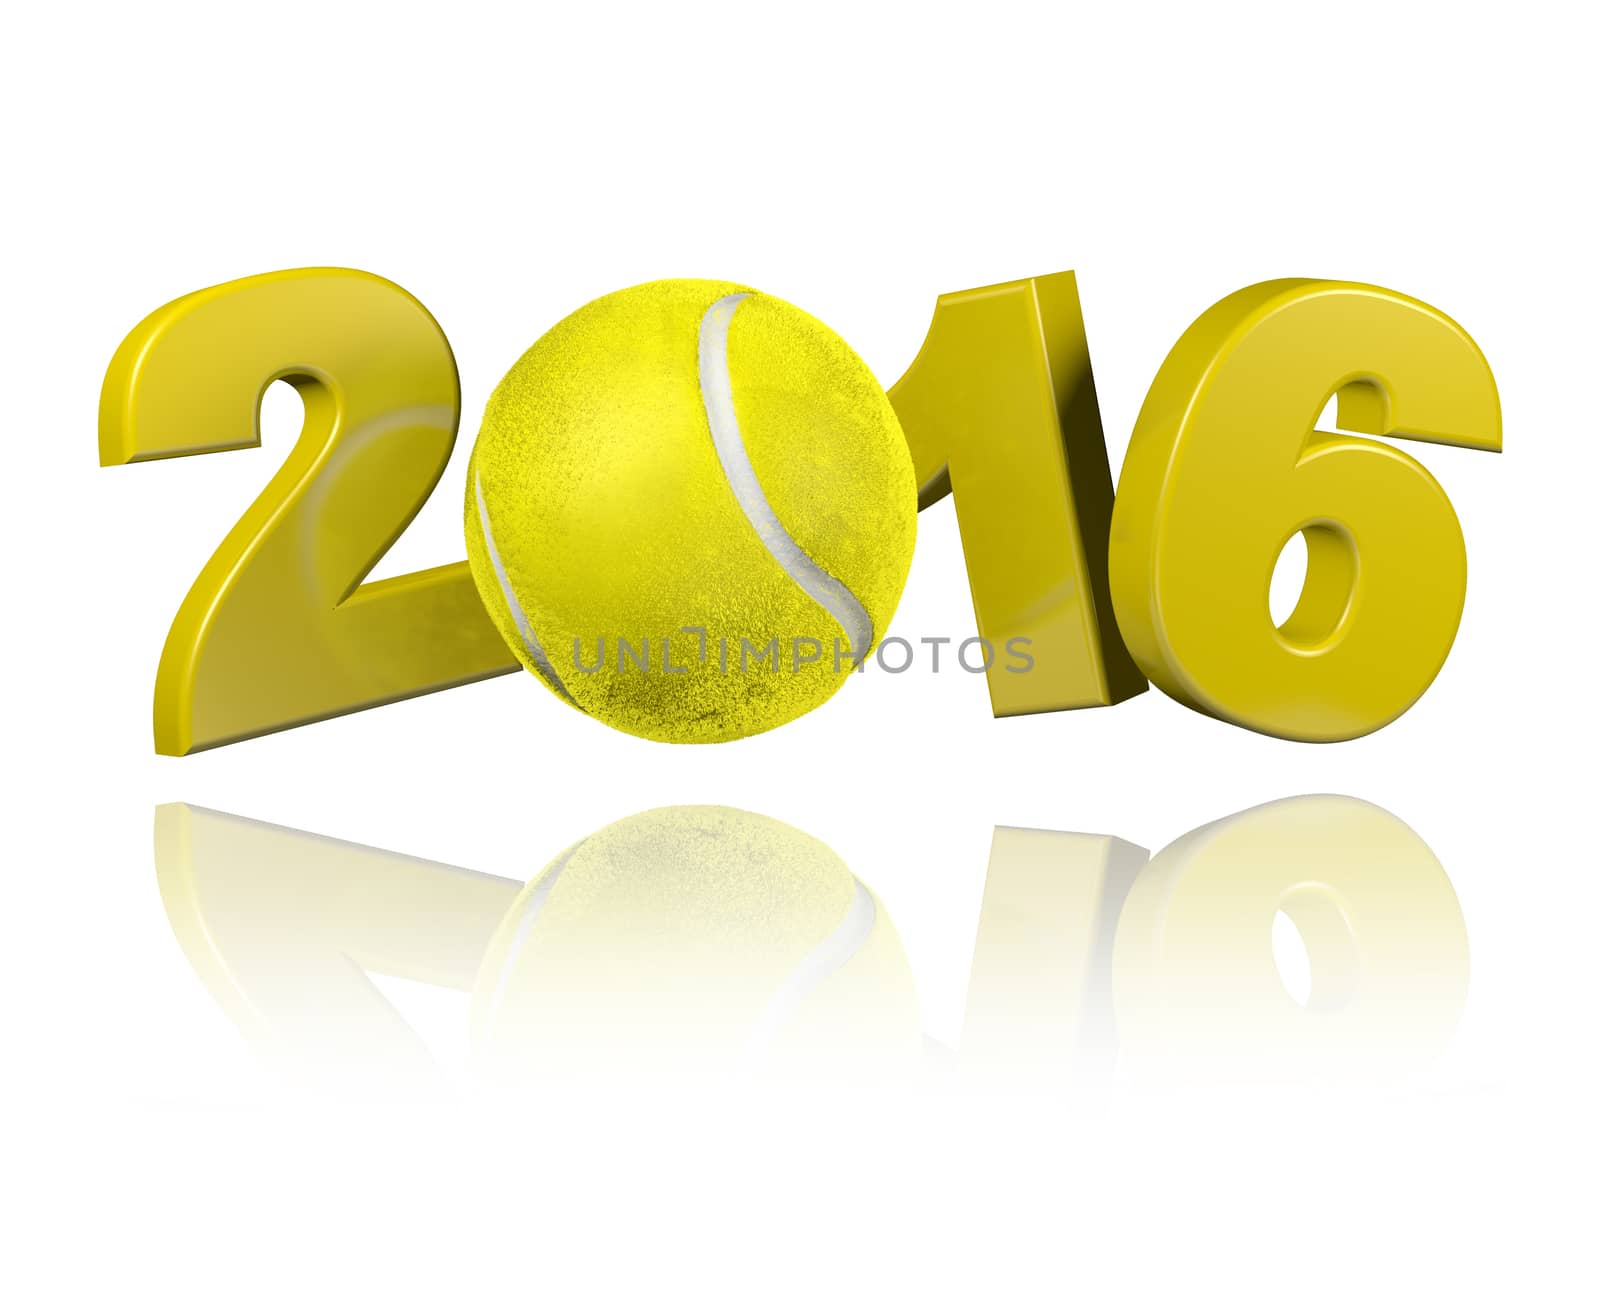 Tennis 2016 design with a White Background